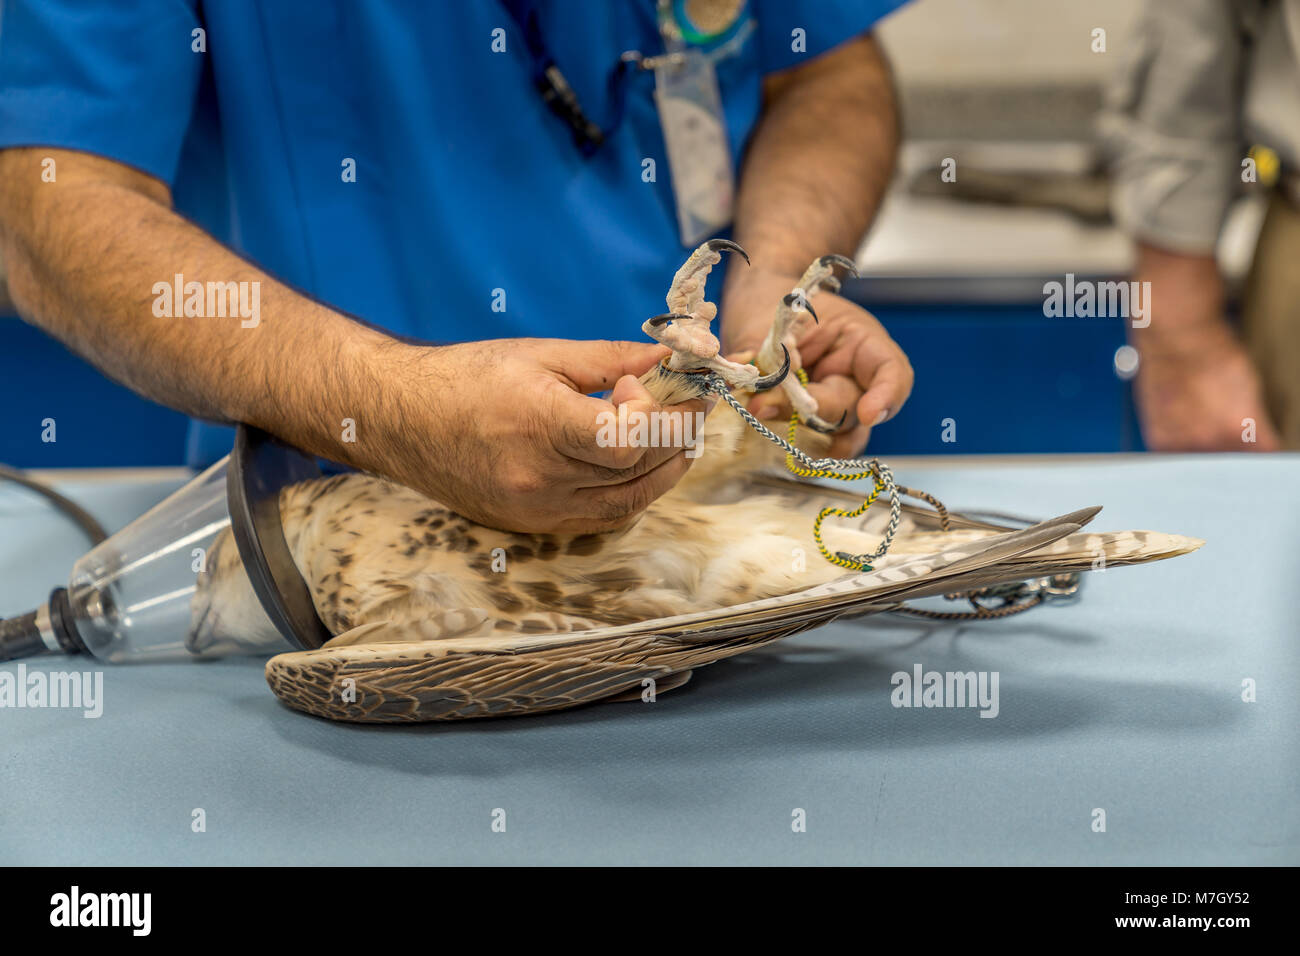 Abu Dhabi, UAE - Jan 11, 2018. A falcon on a laboratory table being examined after anesthesia. Stock Photo